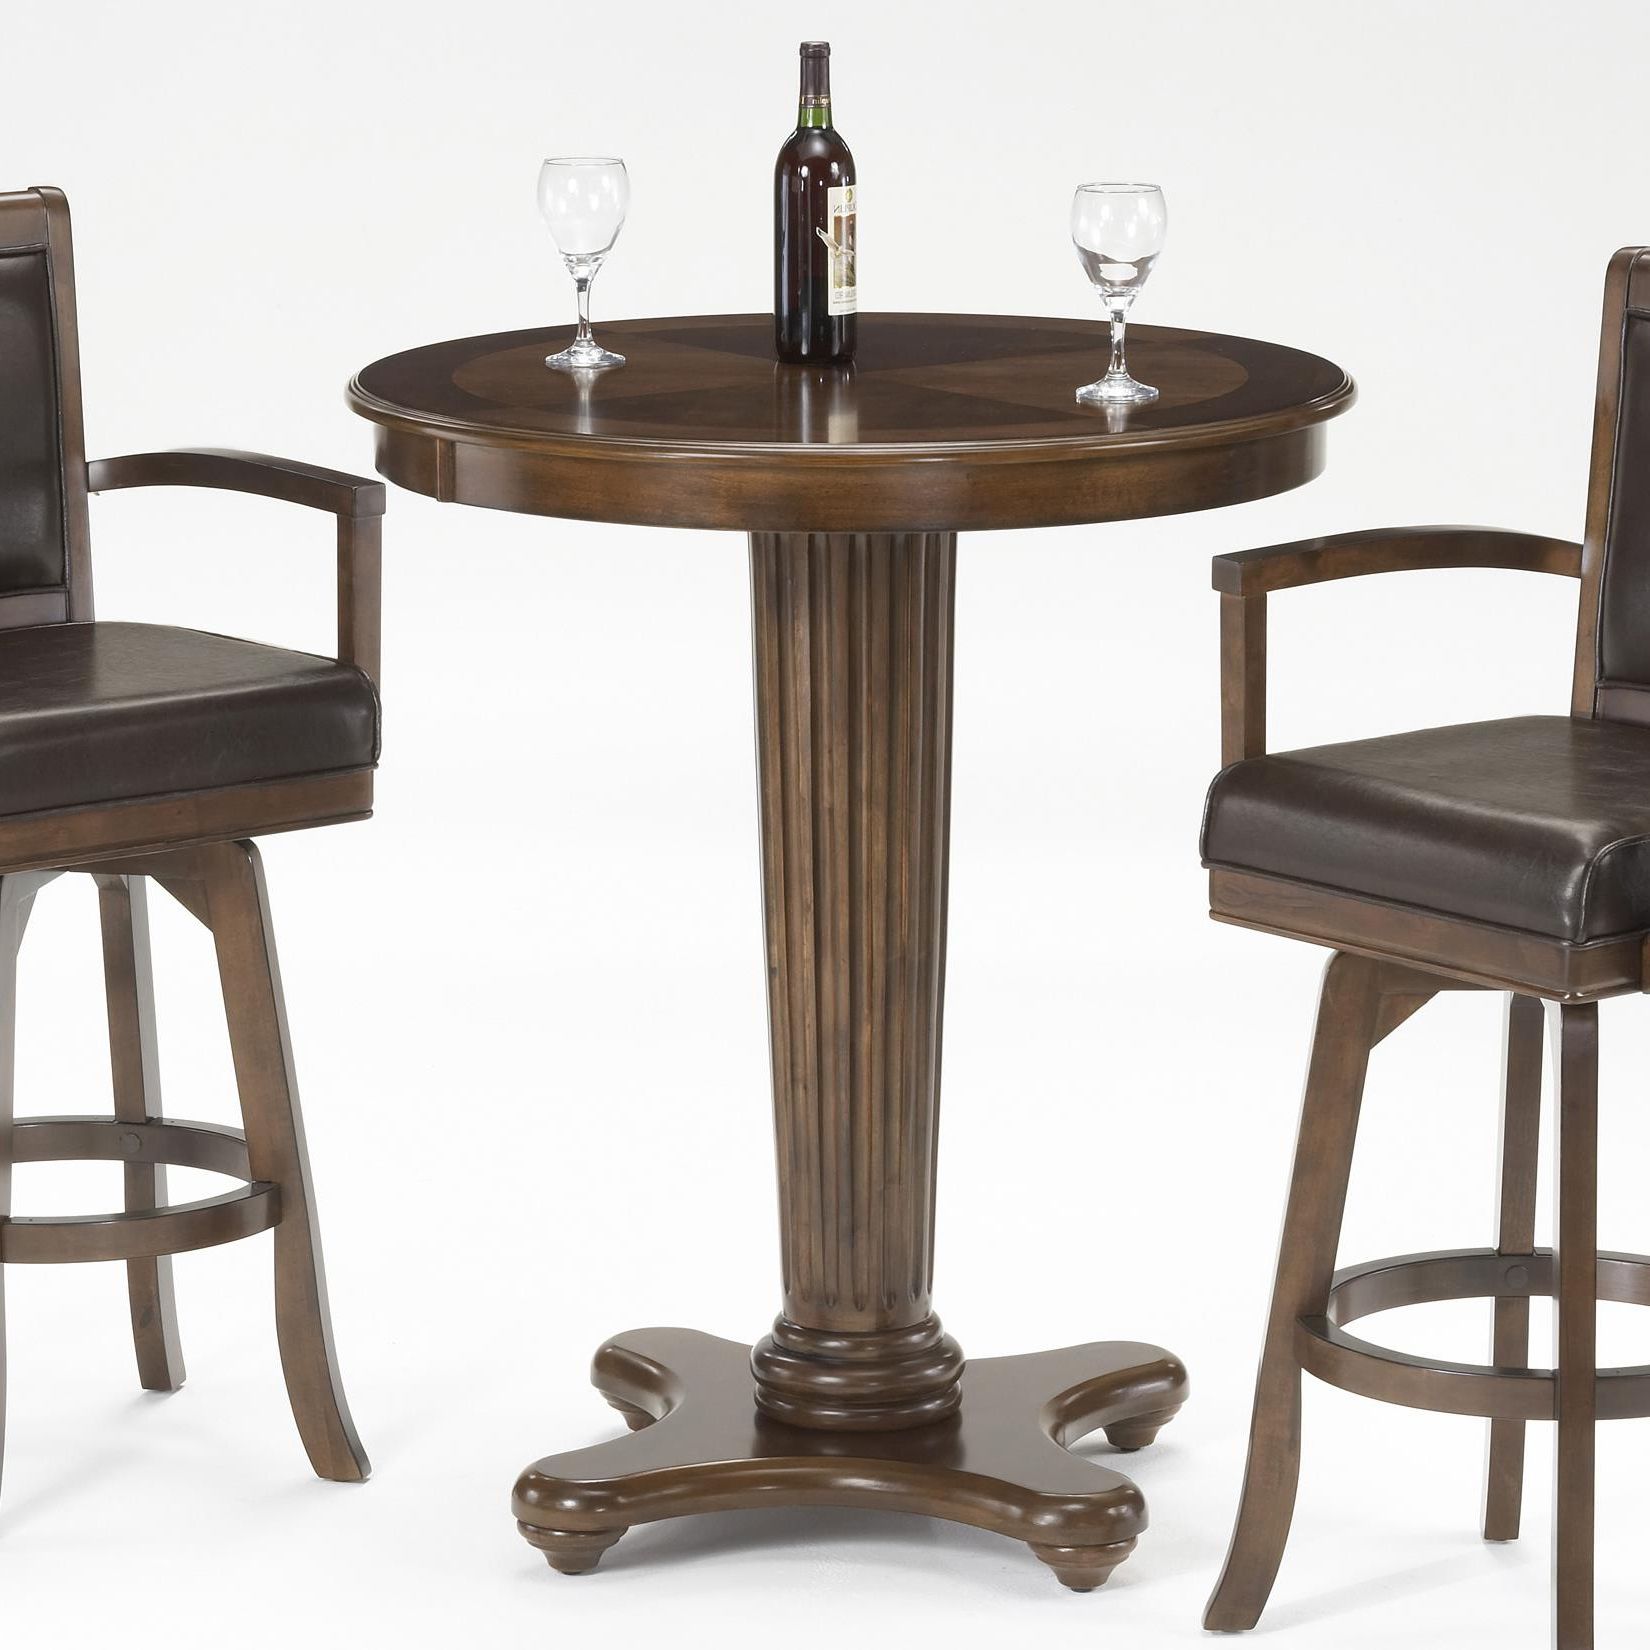 Hillsdale Ambassador Bar Height Table With Fluted Pedestal For Well Known Andrelle Bar Height Pedestal Dining Tables (View 13 of 20)